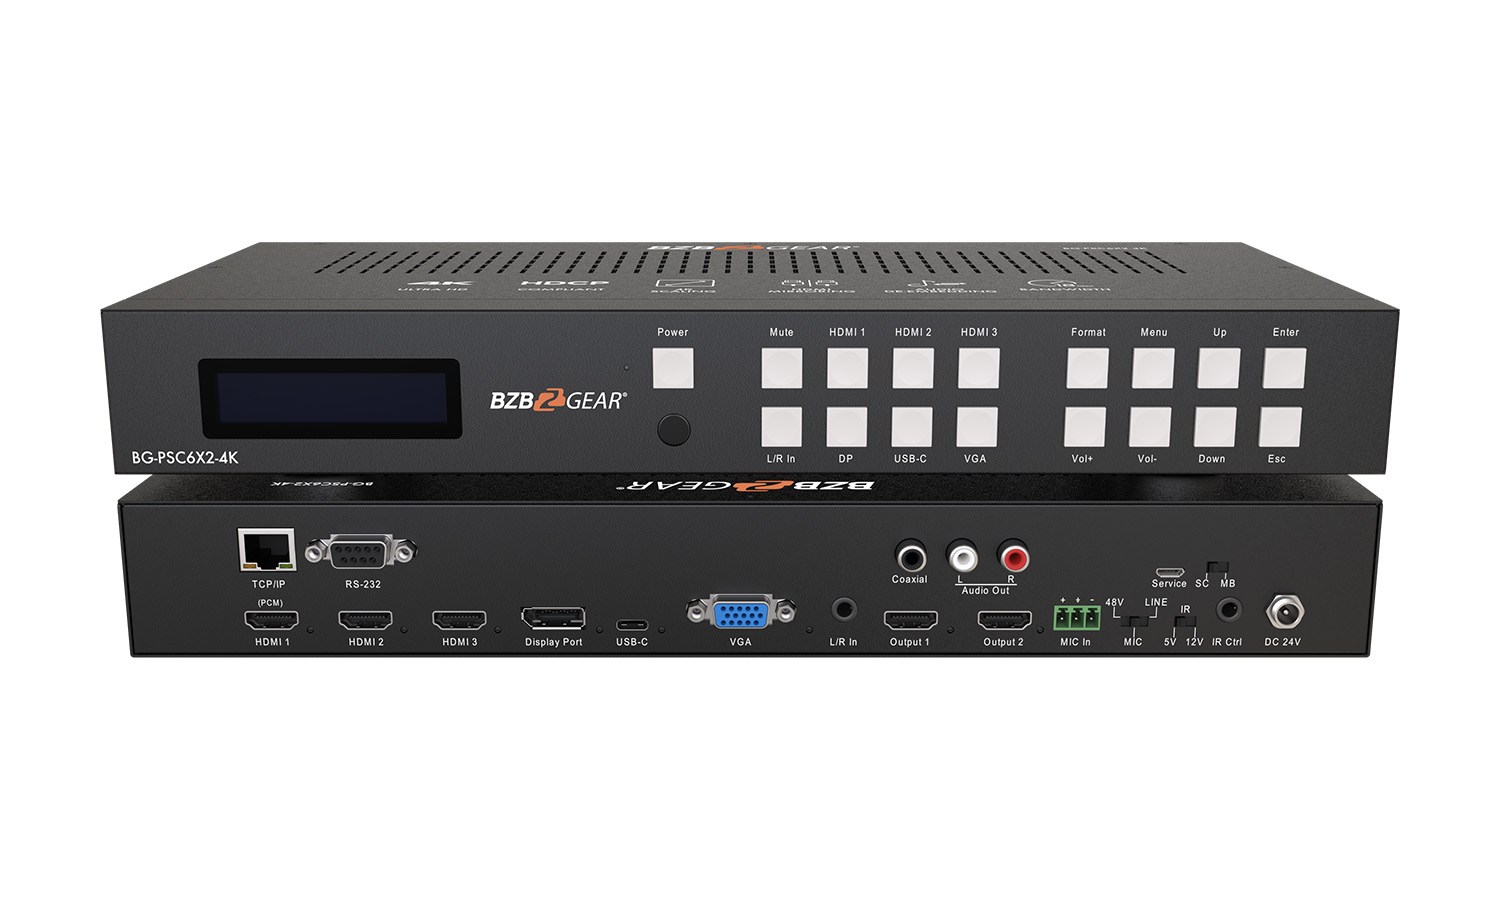 BG-PSC6x2-4K 6x2 4K UHD Conference Room Presentation Switcher Scaler with HDMI/VGA/USB-C/DP and Audio by BZBGEAR